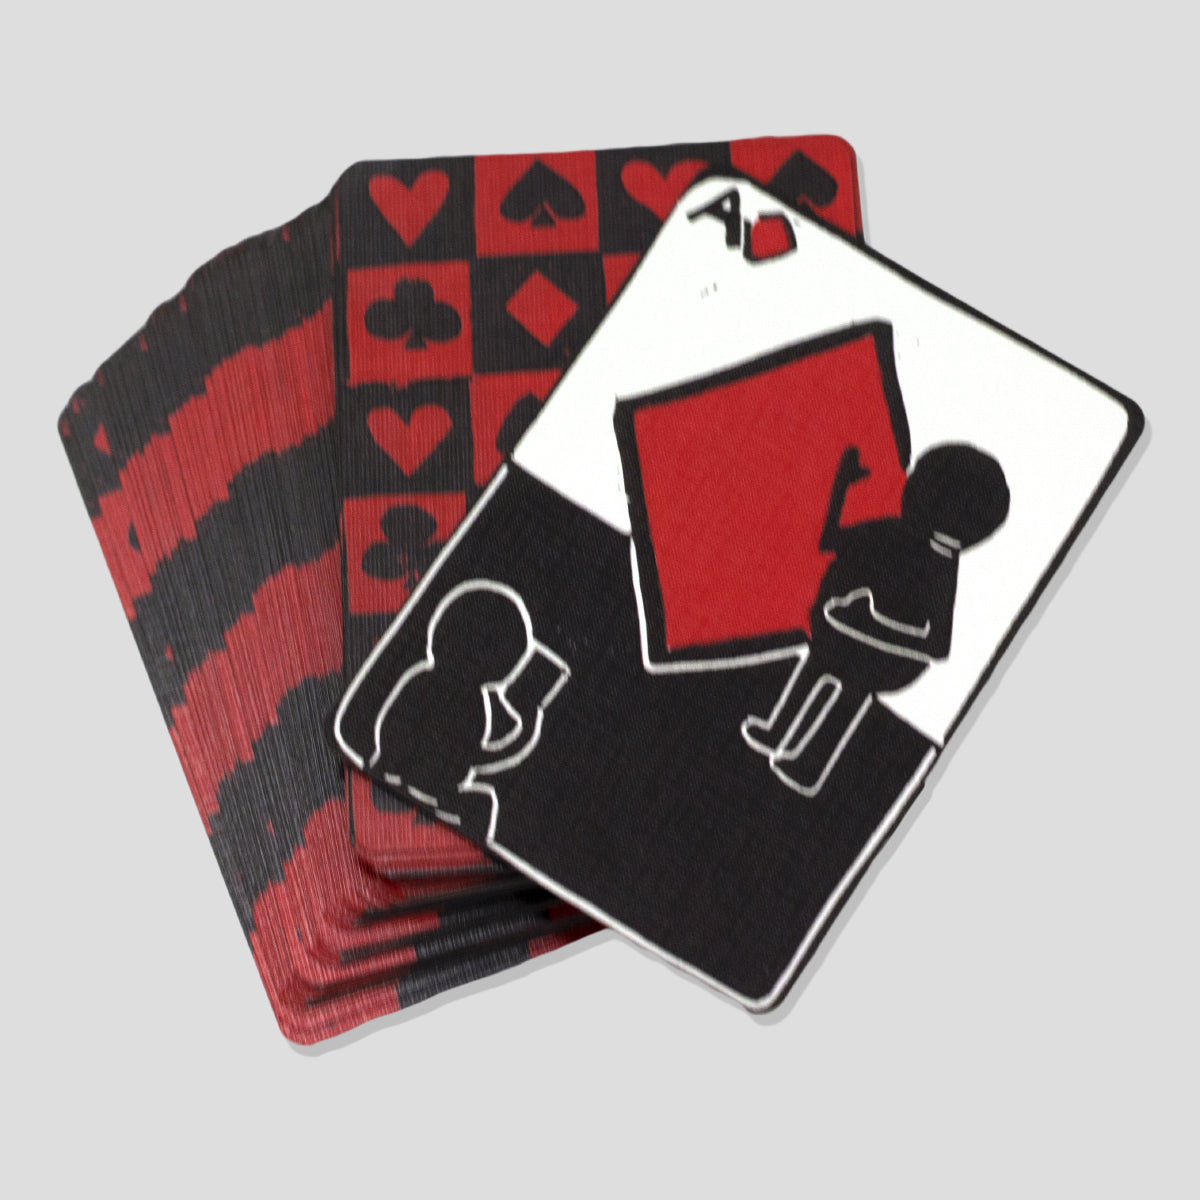 CHINA HEIGHTS POPPY WILLIAMS PLAYING CARDS